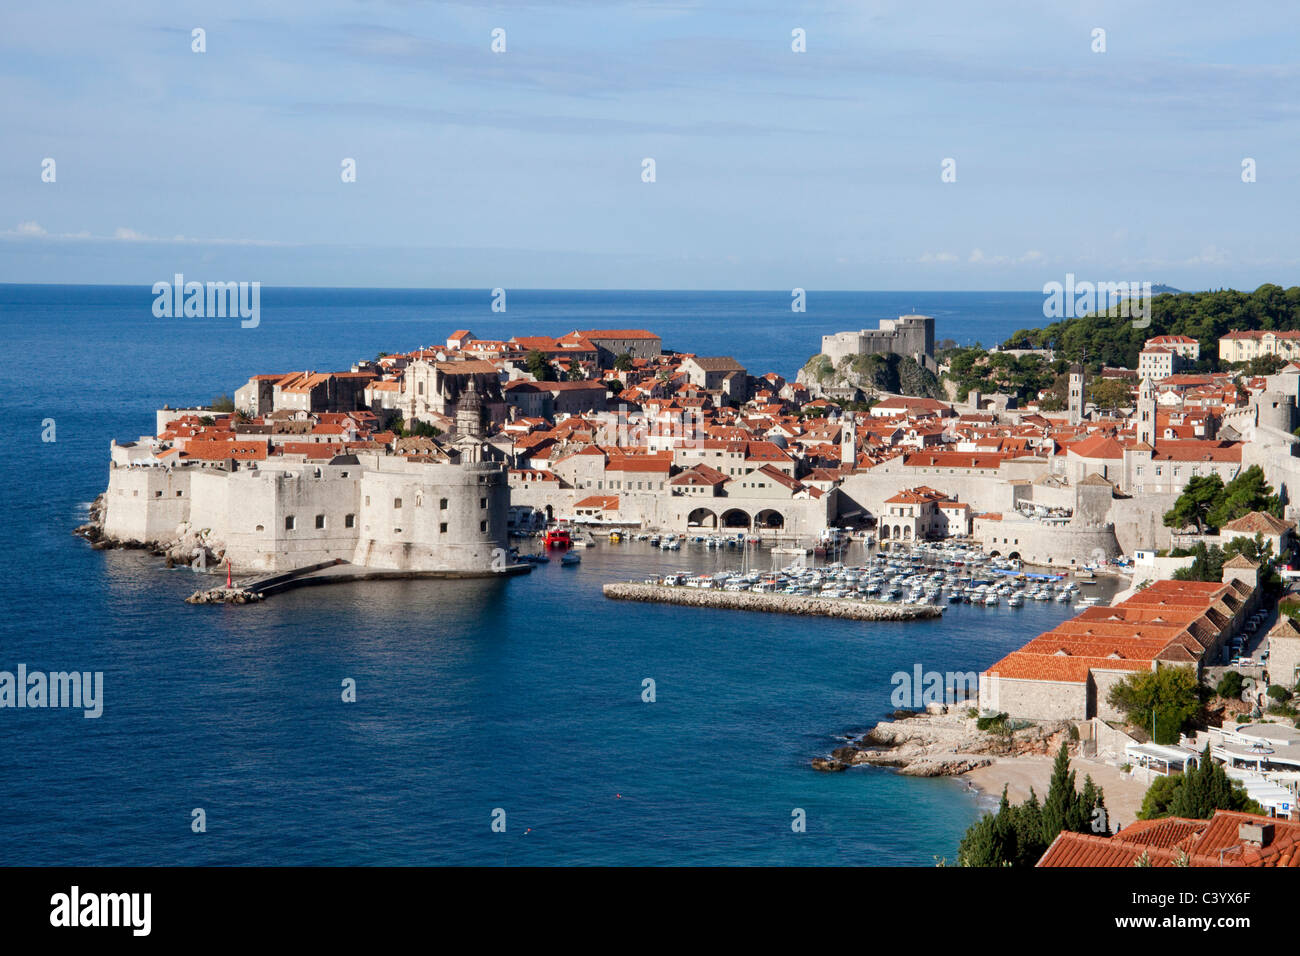 Croatia, Europe, Dubrovnik, Old Town, world cultural heritage, walls, roofs Stock Photo